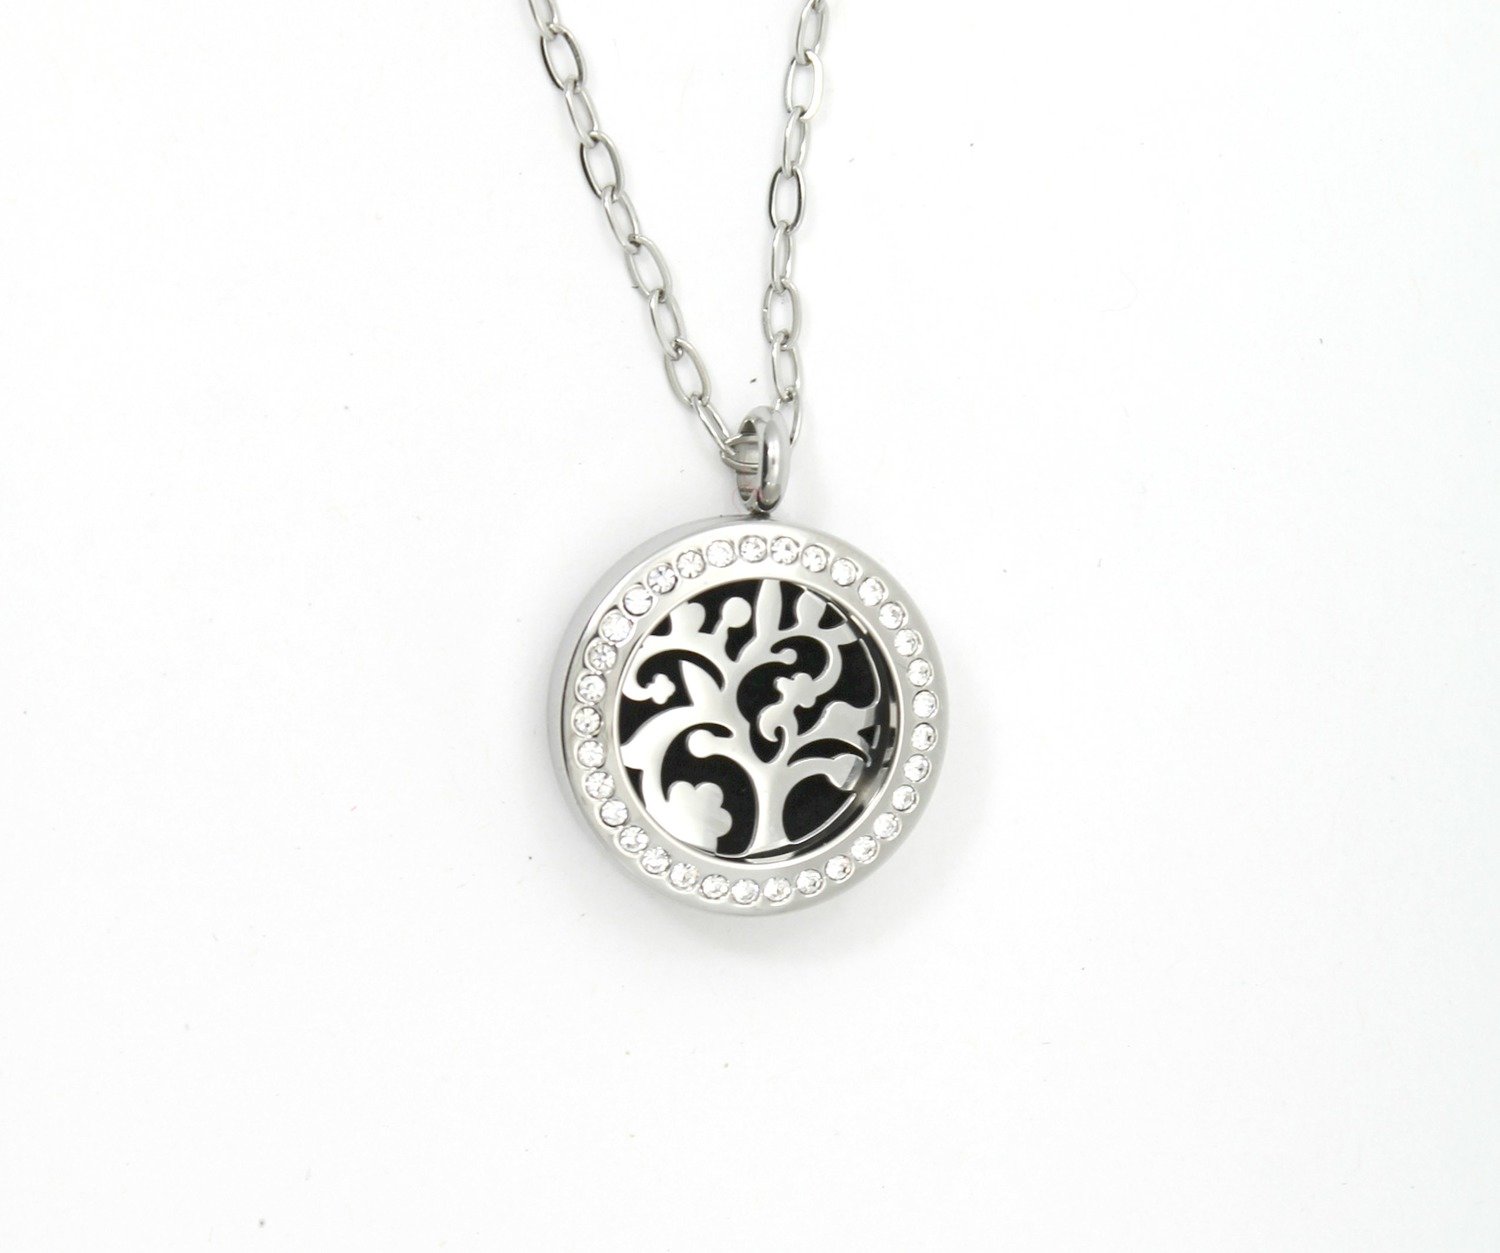 Gnarly Tree Twist Locket Necklace w/Crystals in Stainless Steel- *Interchangeable*